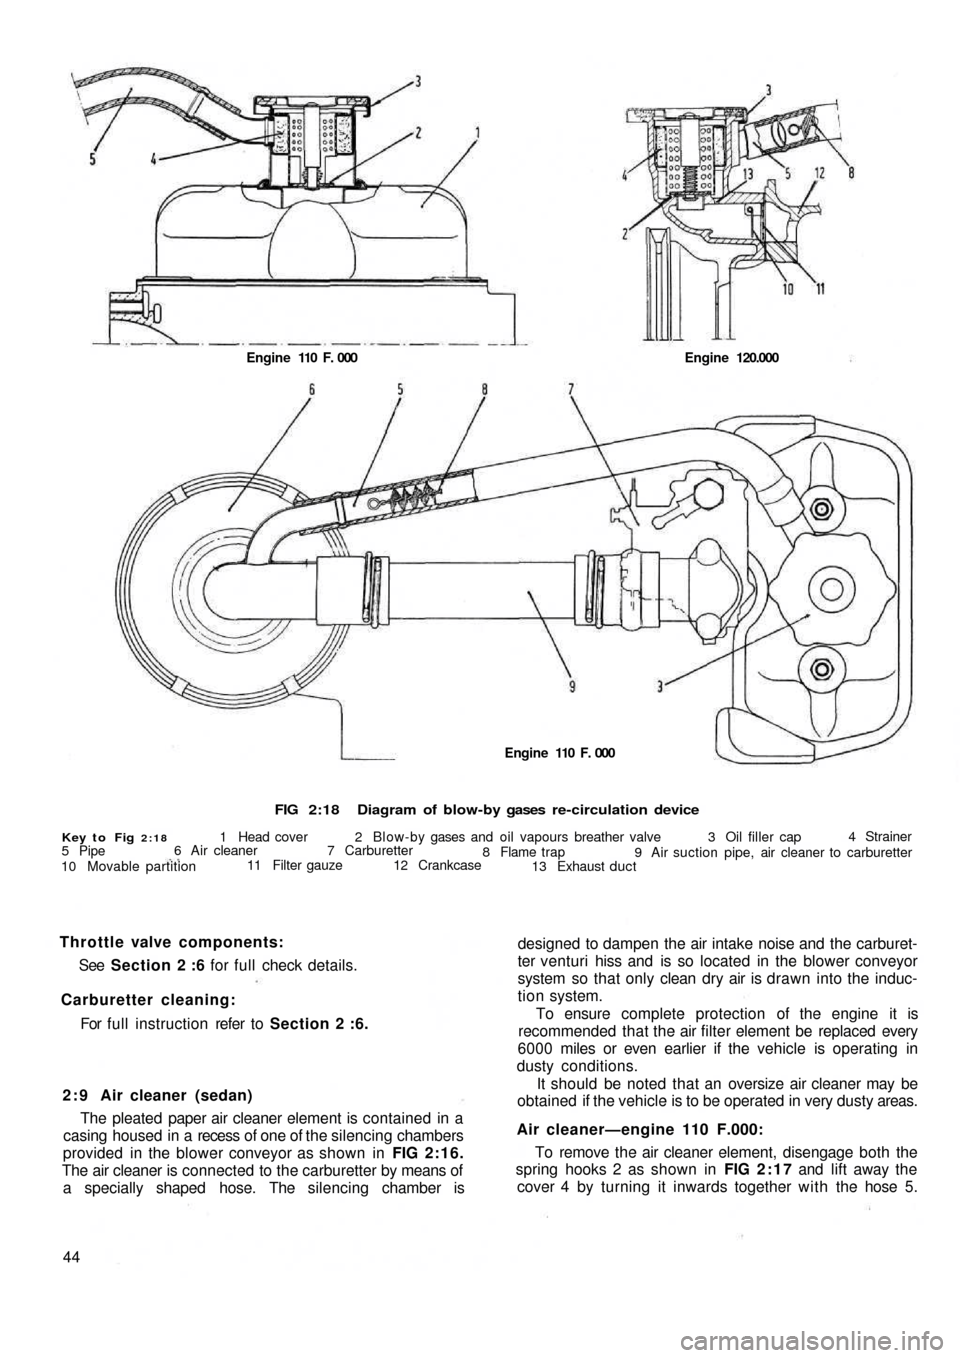 FIAT 500 1970 1.G Workshop Manual FIG 2:18Diagram of blow-by gases  re-circulation device
Key to Fig 2:181 Head cover 2 Blow-by gases and  oil vapours breather valve 3 Oil filler cap4 Strainer
9 Air suction pipe, air cleaner to carbur